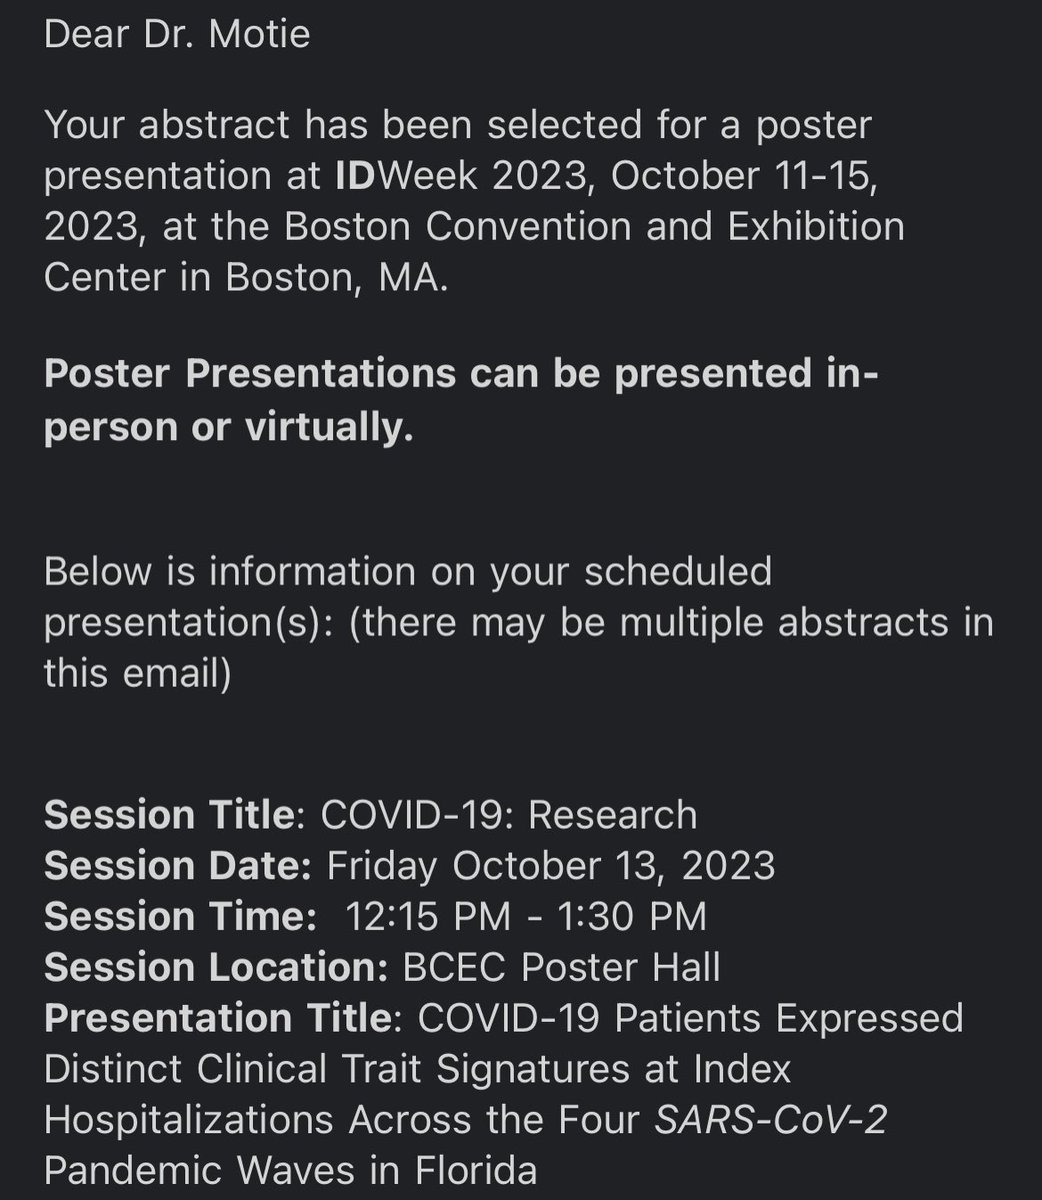 Needed some good news after this crazy week. Excited for my first #IDWeek! #IDTwitter